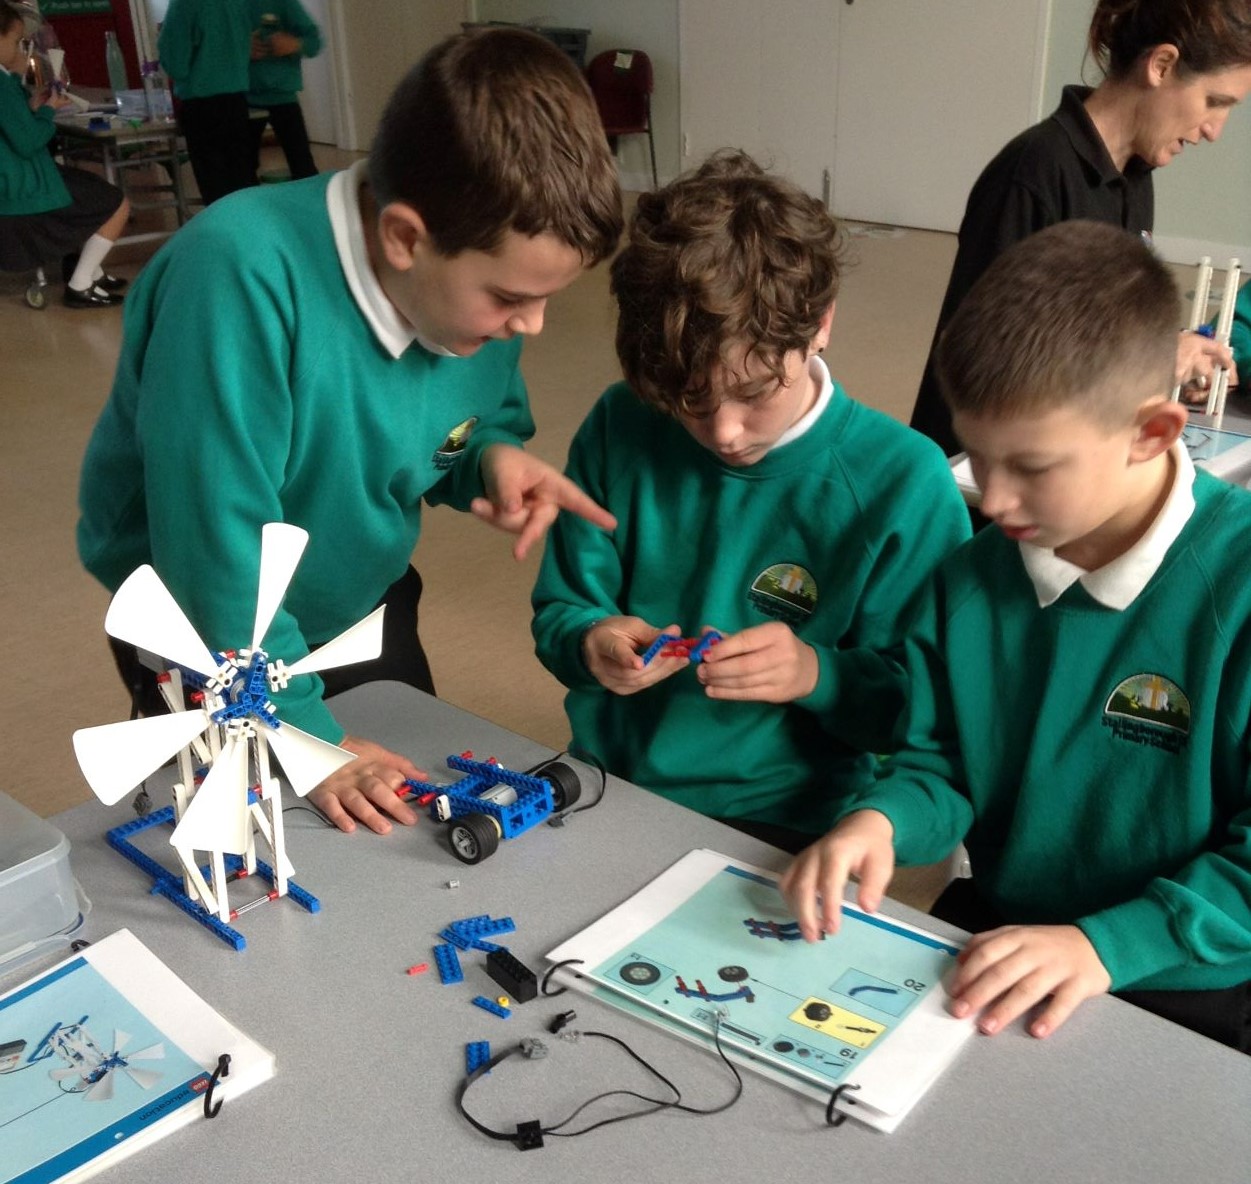 RWE fosters future ‘Master Builders’ through new Wind Energy Workshops in Grimsby